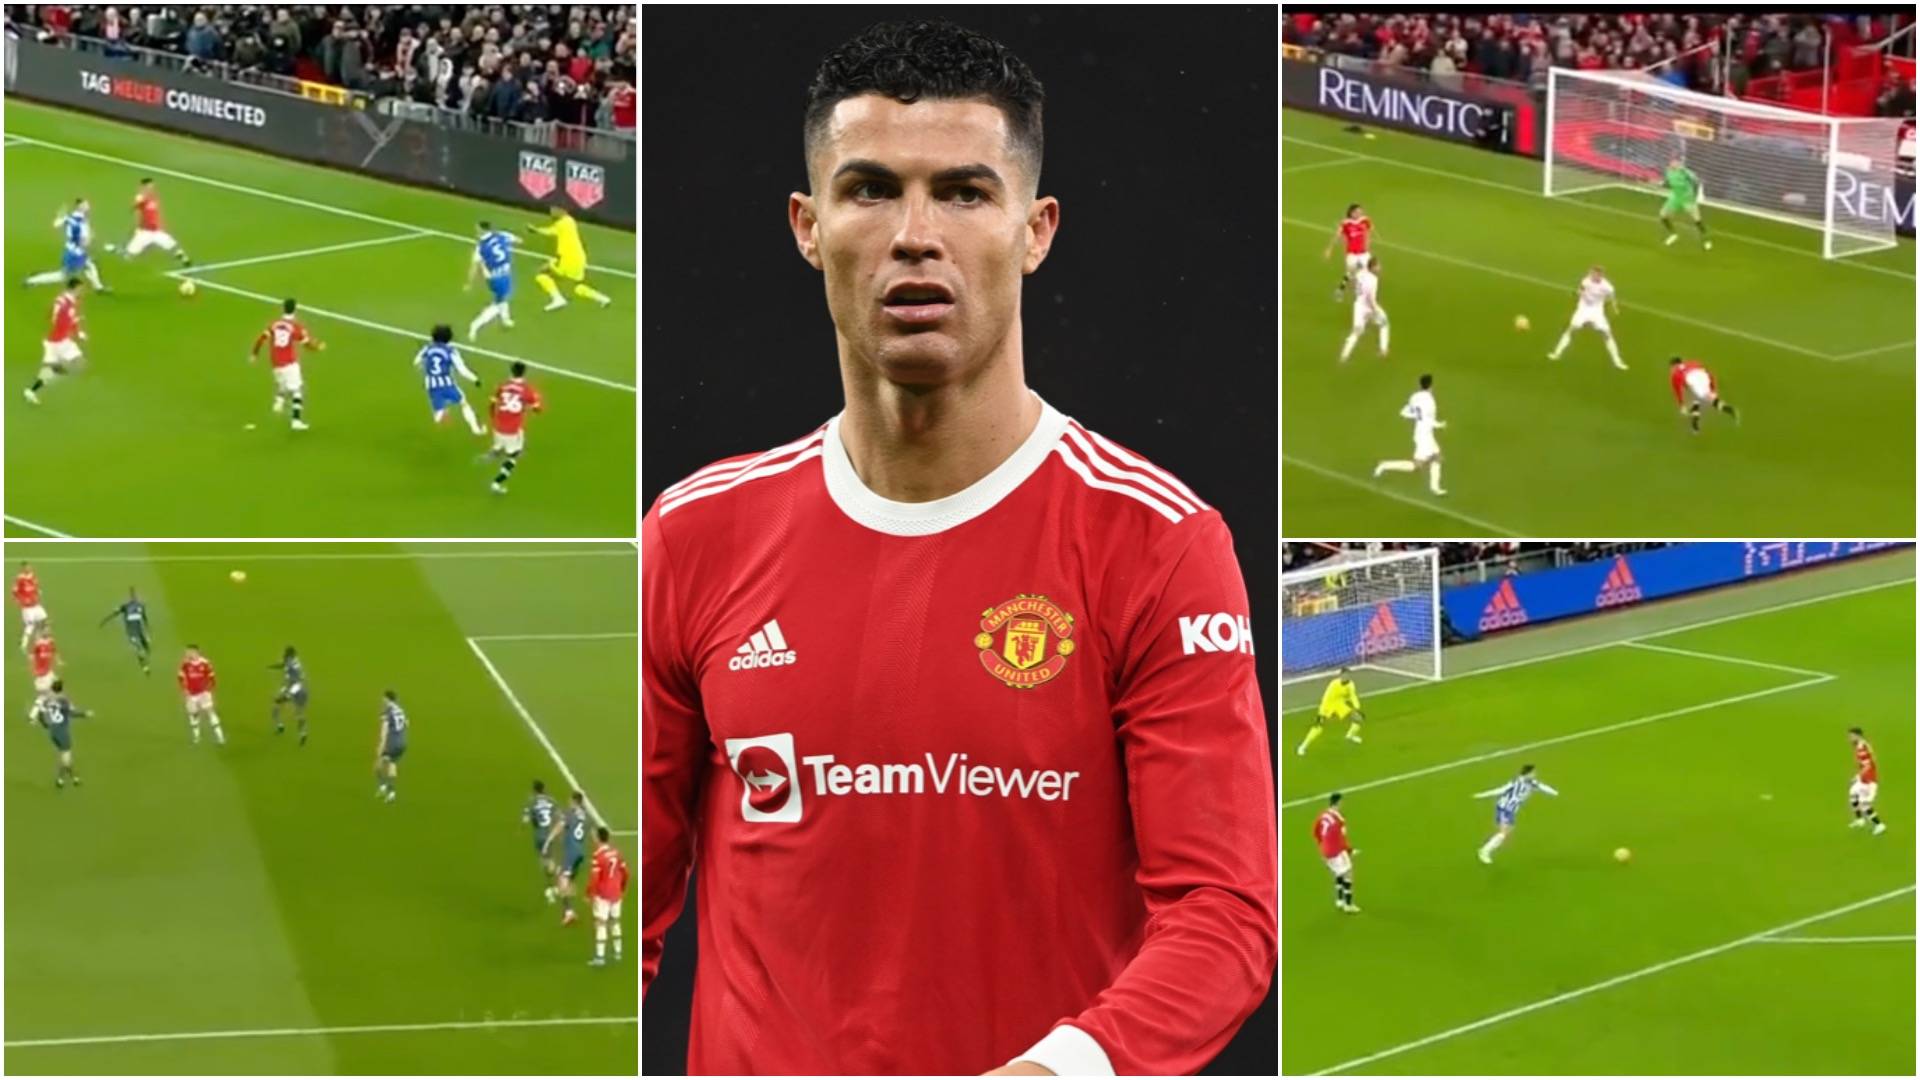 Video titled ‘How can you blame Cristiano Ronaldo’ goes viral after Arsenal 3-1 Man Utd